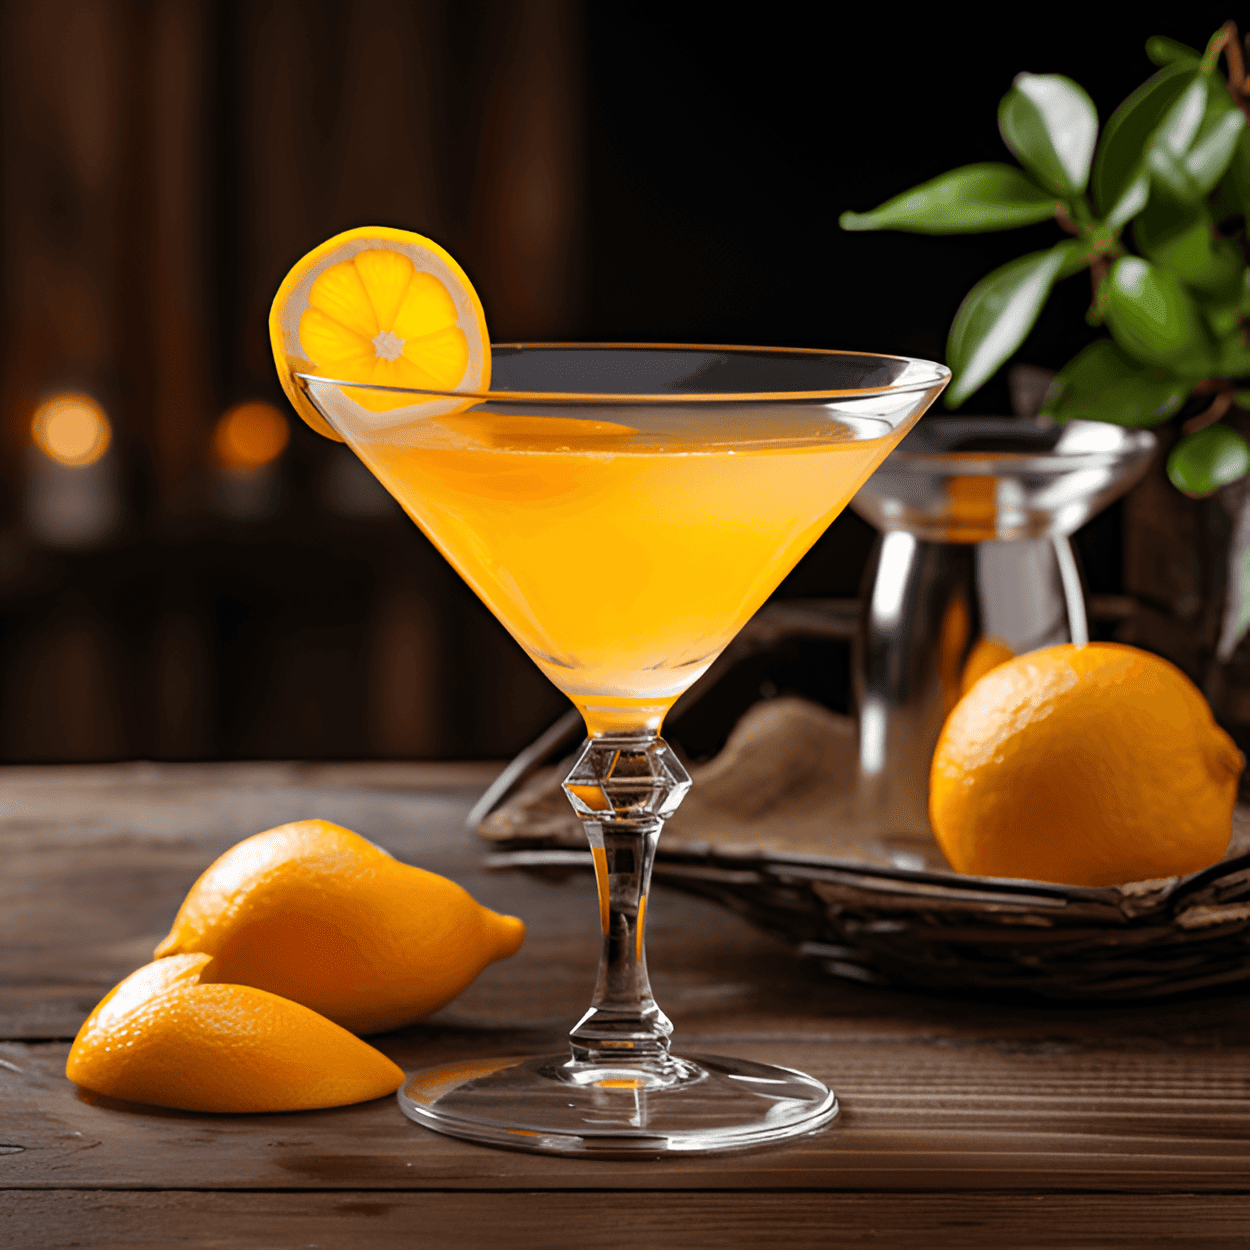 Navel Recipe - The Navel Cocktail offers a delightful balance of sweet and sour flavors. The sweetness of the orange liqueur is perfectly balanced by the tartness of the lemon juice. It's a refreshing, citrusy drink with a smooth, velvety finish.